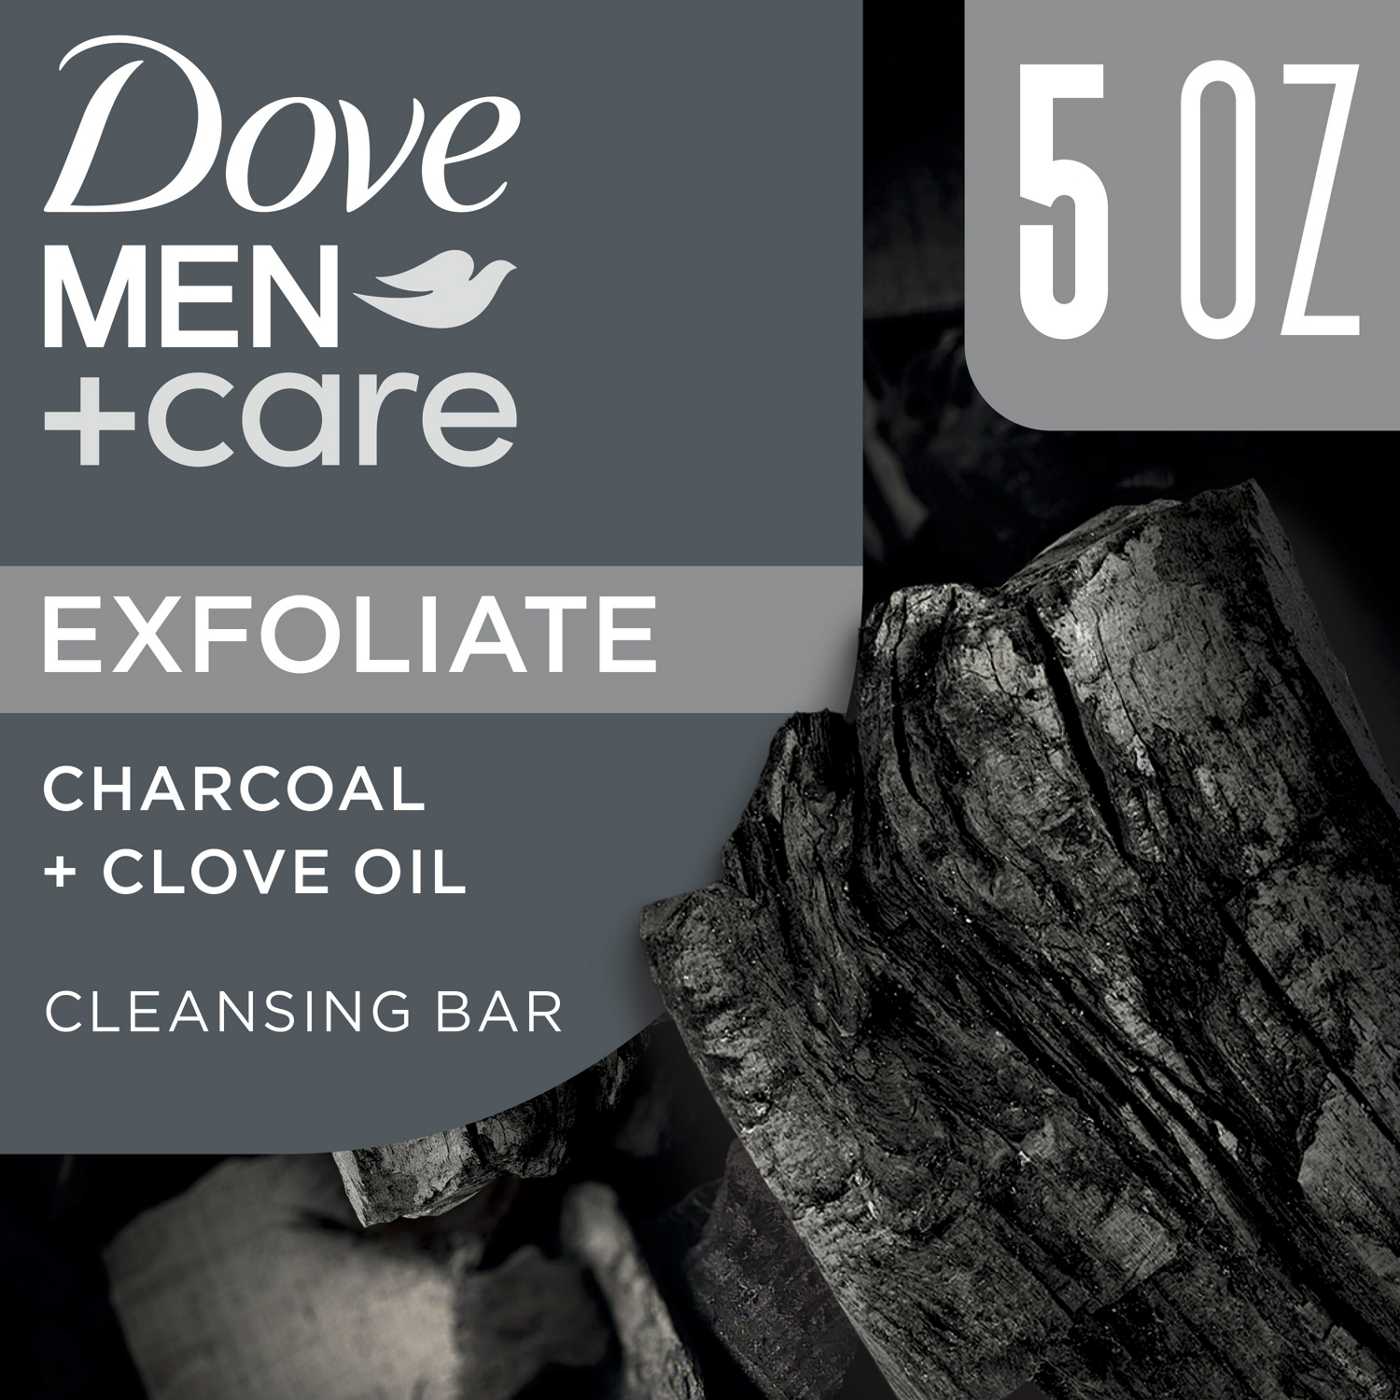 Dove Men+Care Exfoliate Cleansing Bar - Charcoal + Clove Oil; image 3 of 3